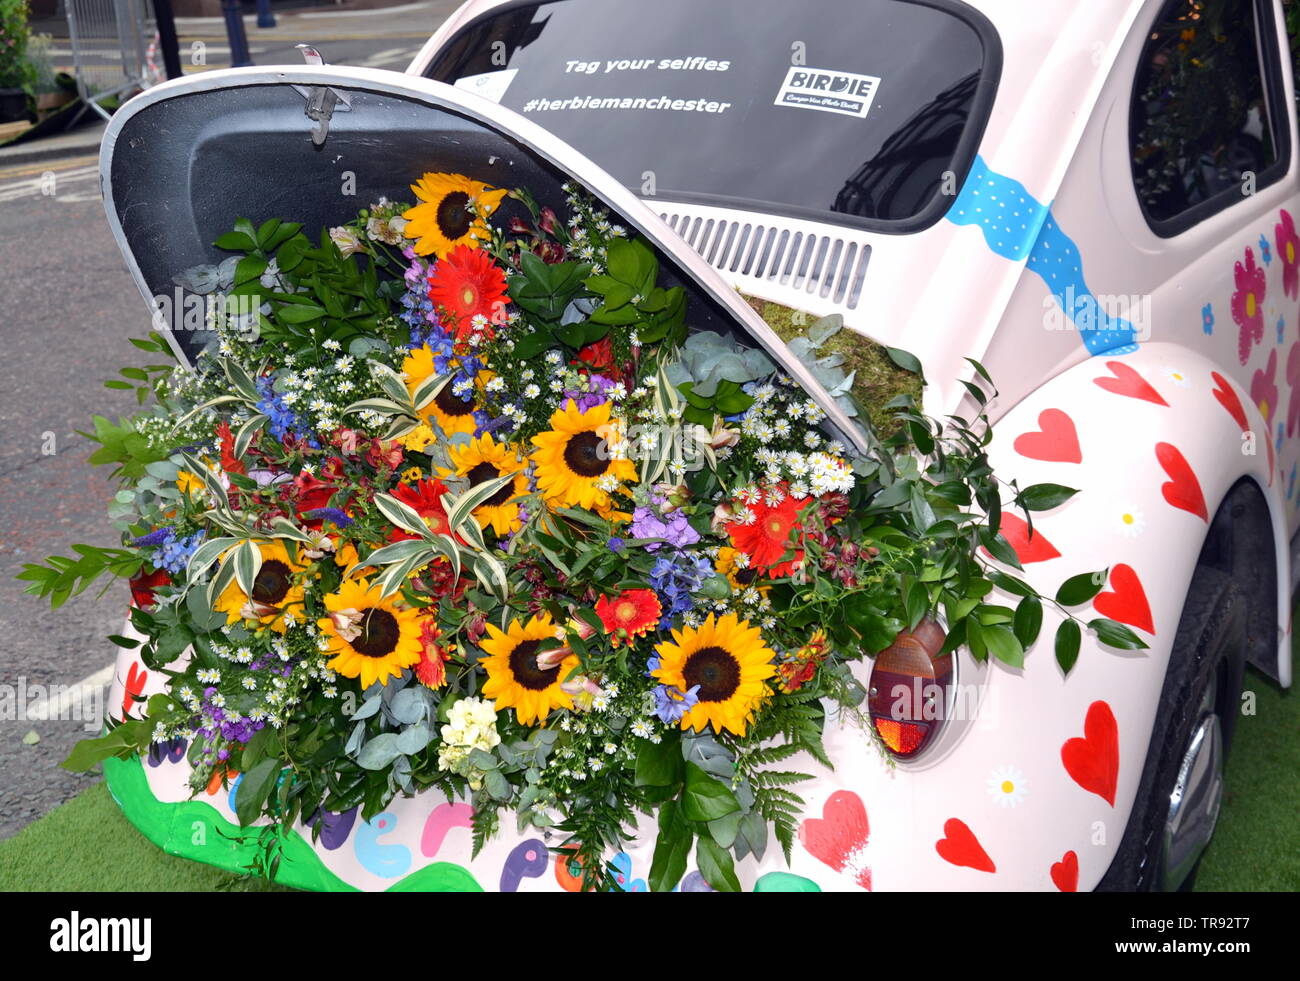 The Manchester Flower Show, part of Manchester's King Street  Festival on June 1st - 2nd, 2019, prepares to open. This year’s theme:Flower Power! Retro objects, like this Volkswagen beetle car, feature in the festival. Stock Photo